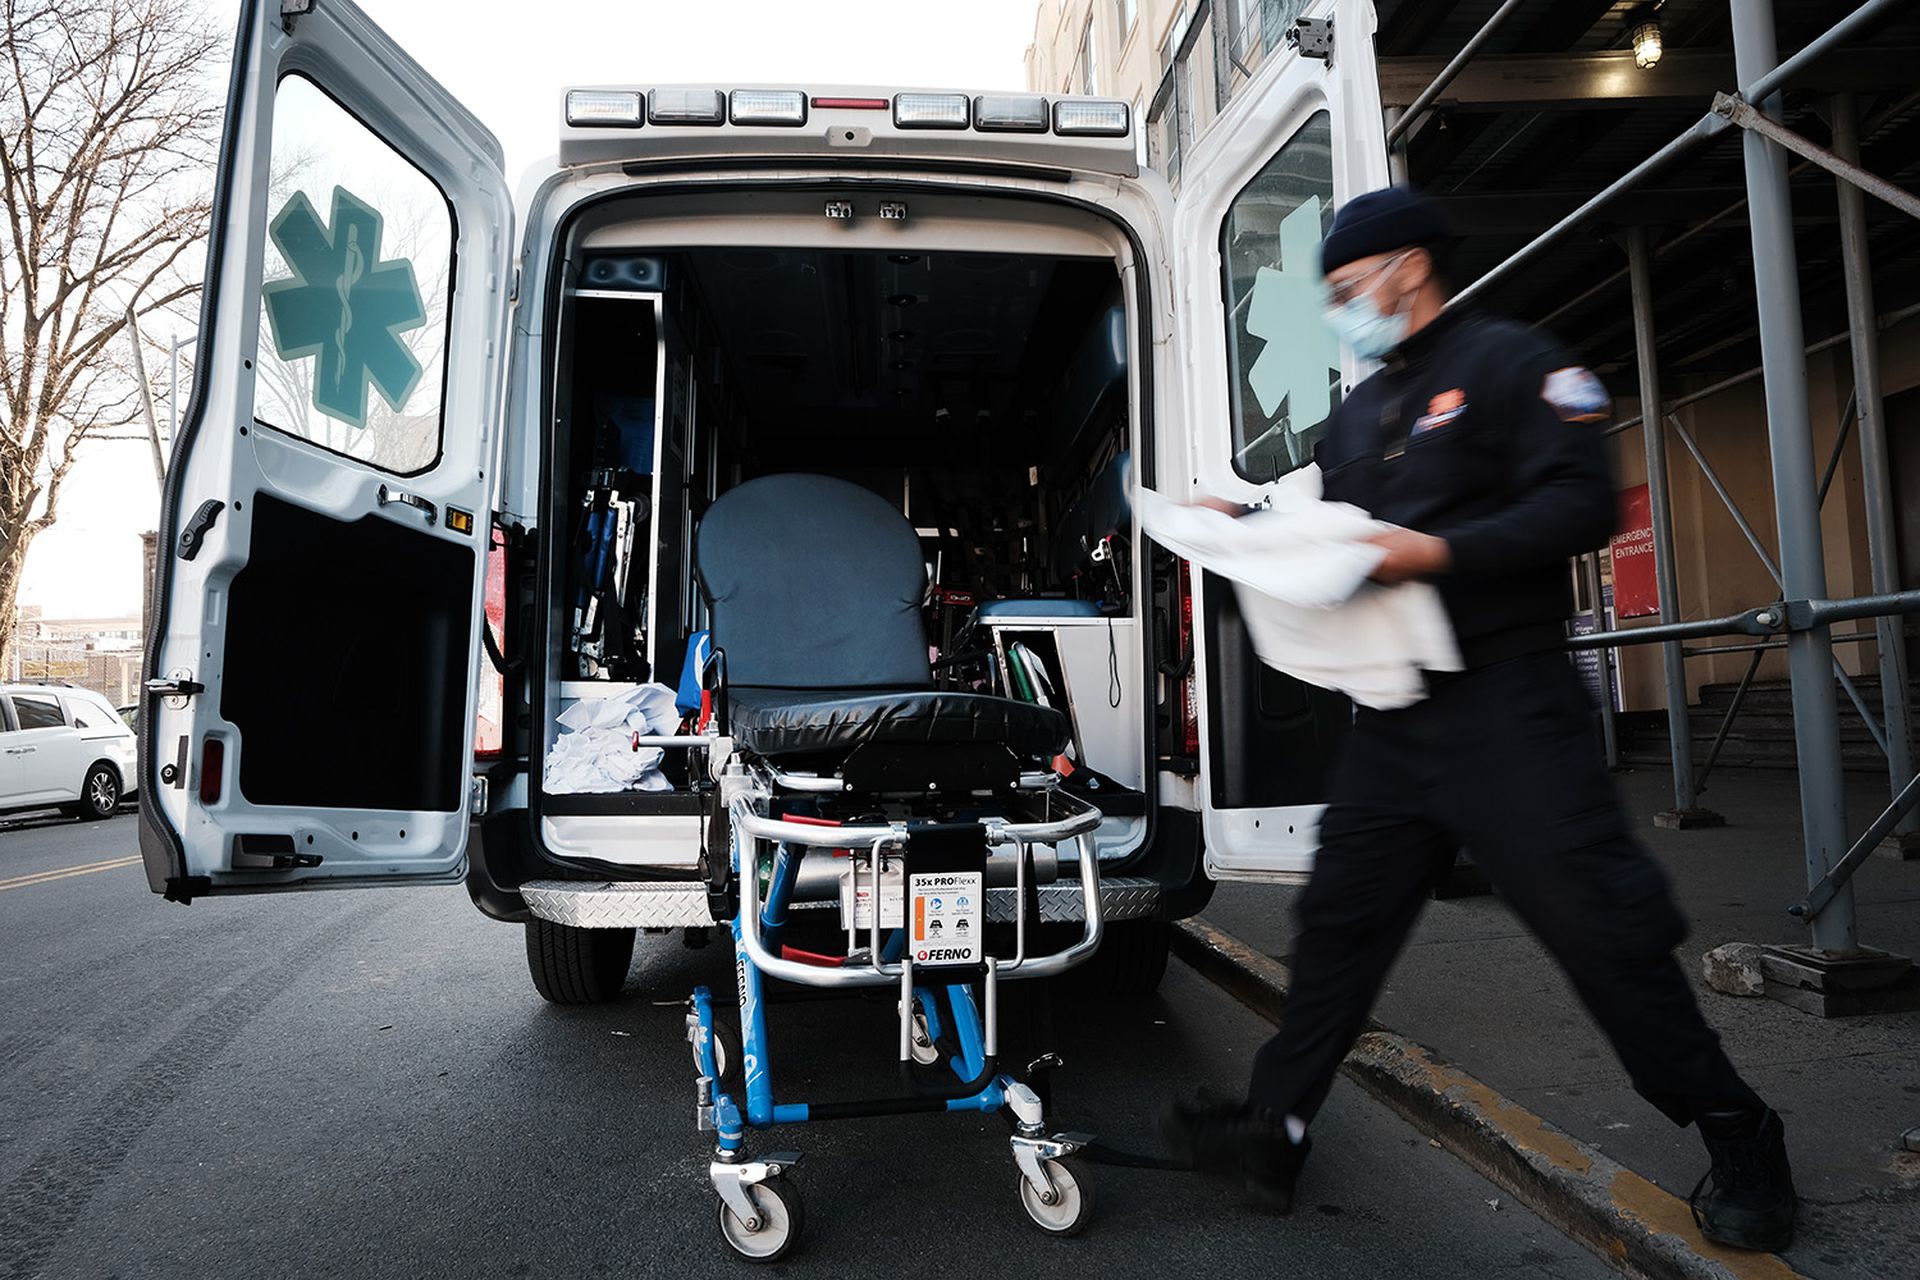 An EMT worker cleans a gurney after transporting a suspected Covid patient outside of a Brooklyn hospital on March, 29 2021, in New York City. Incidents at several hospitals nationwide have led to breaches of patient data. (Photo by Spencer Platt/Getty Images)